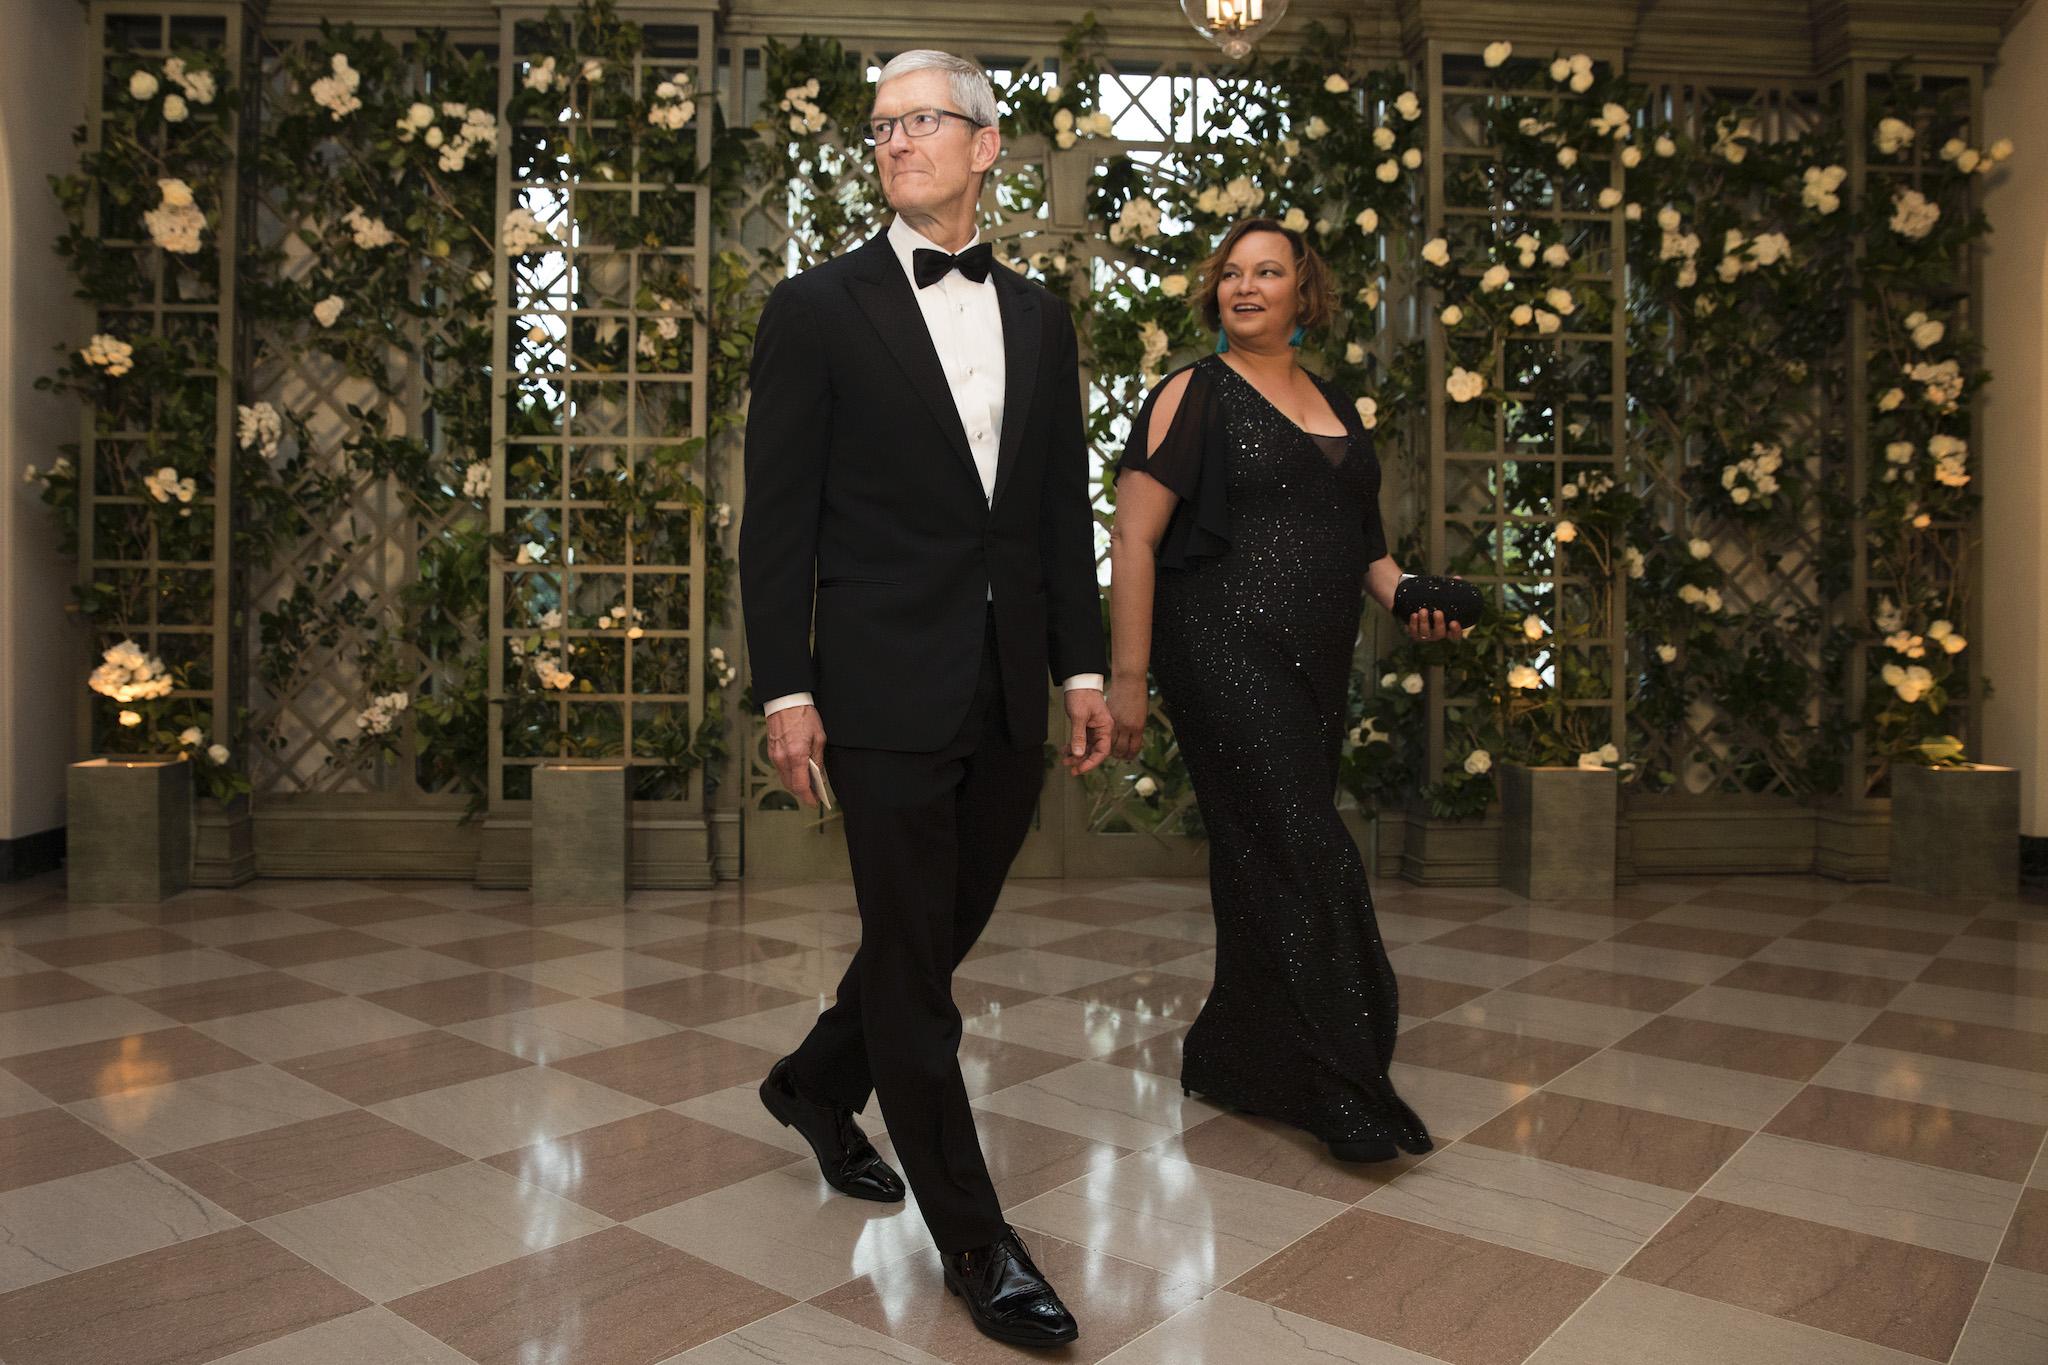 Apple CEO Tim Cook and Lisa Jackson arrive at the White House for a state dinner April 24, 2018 in Washington, DC